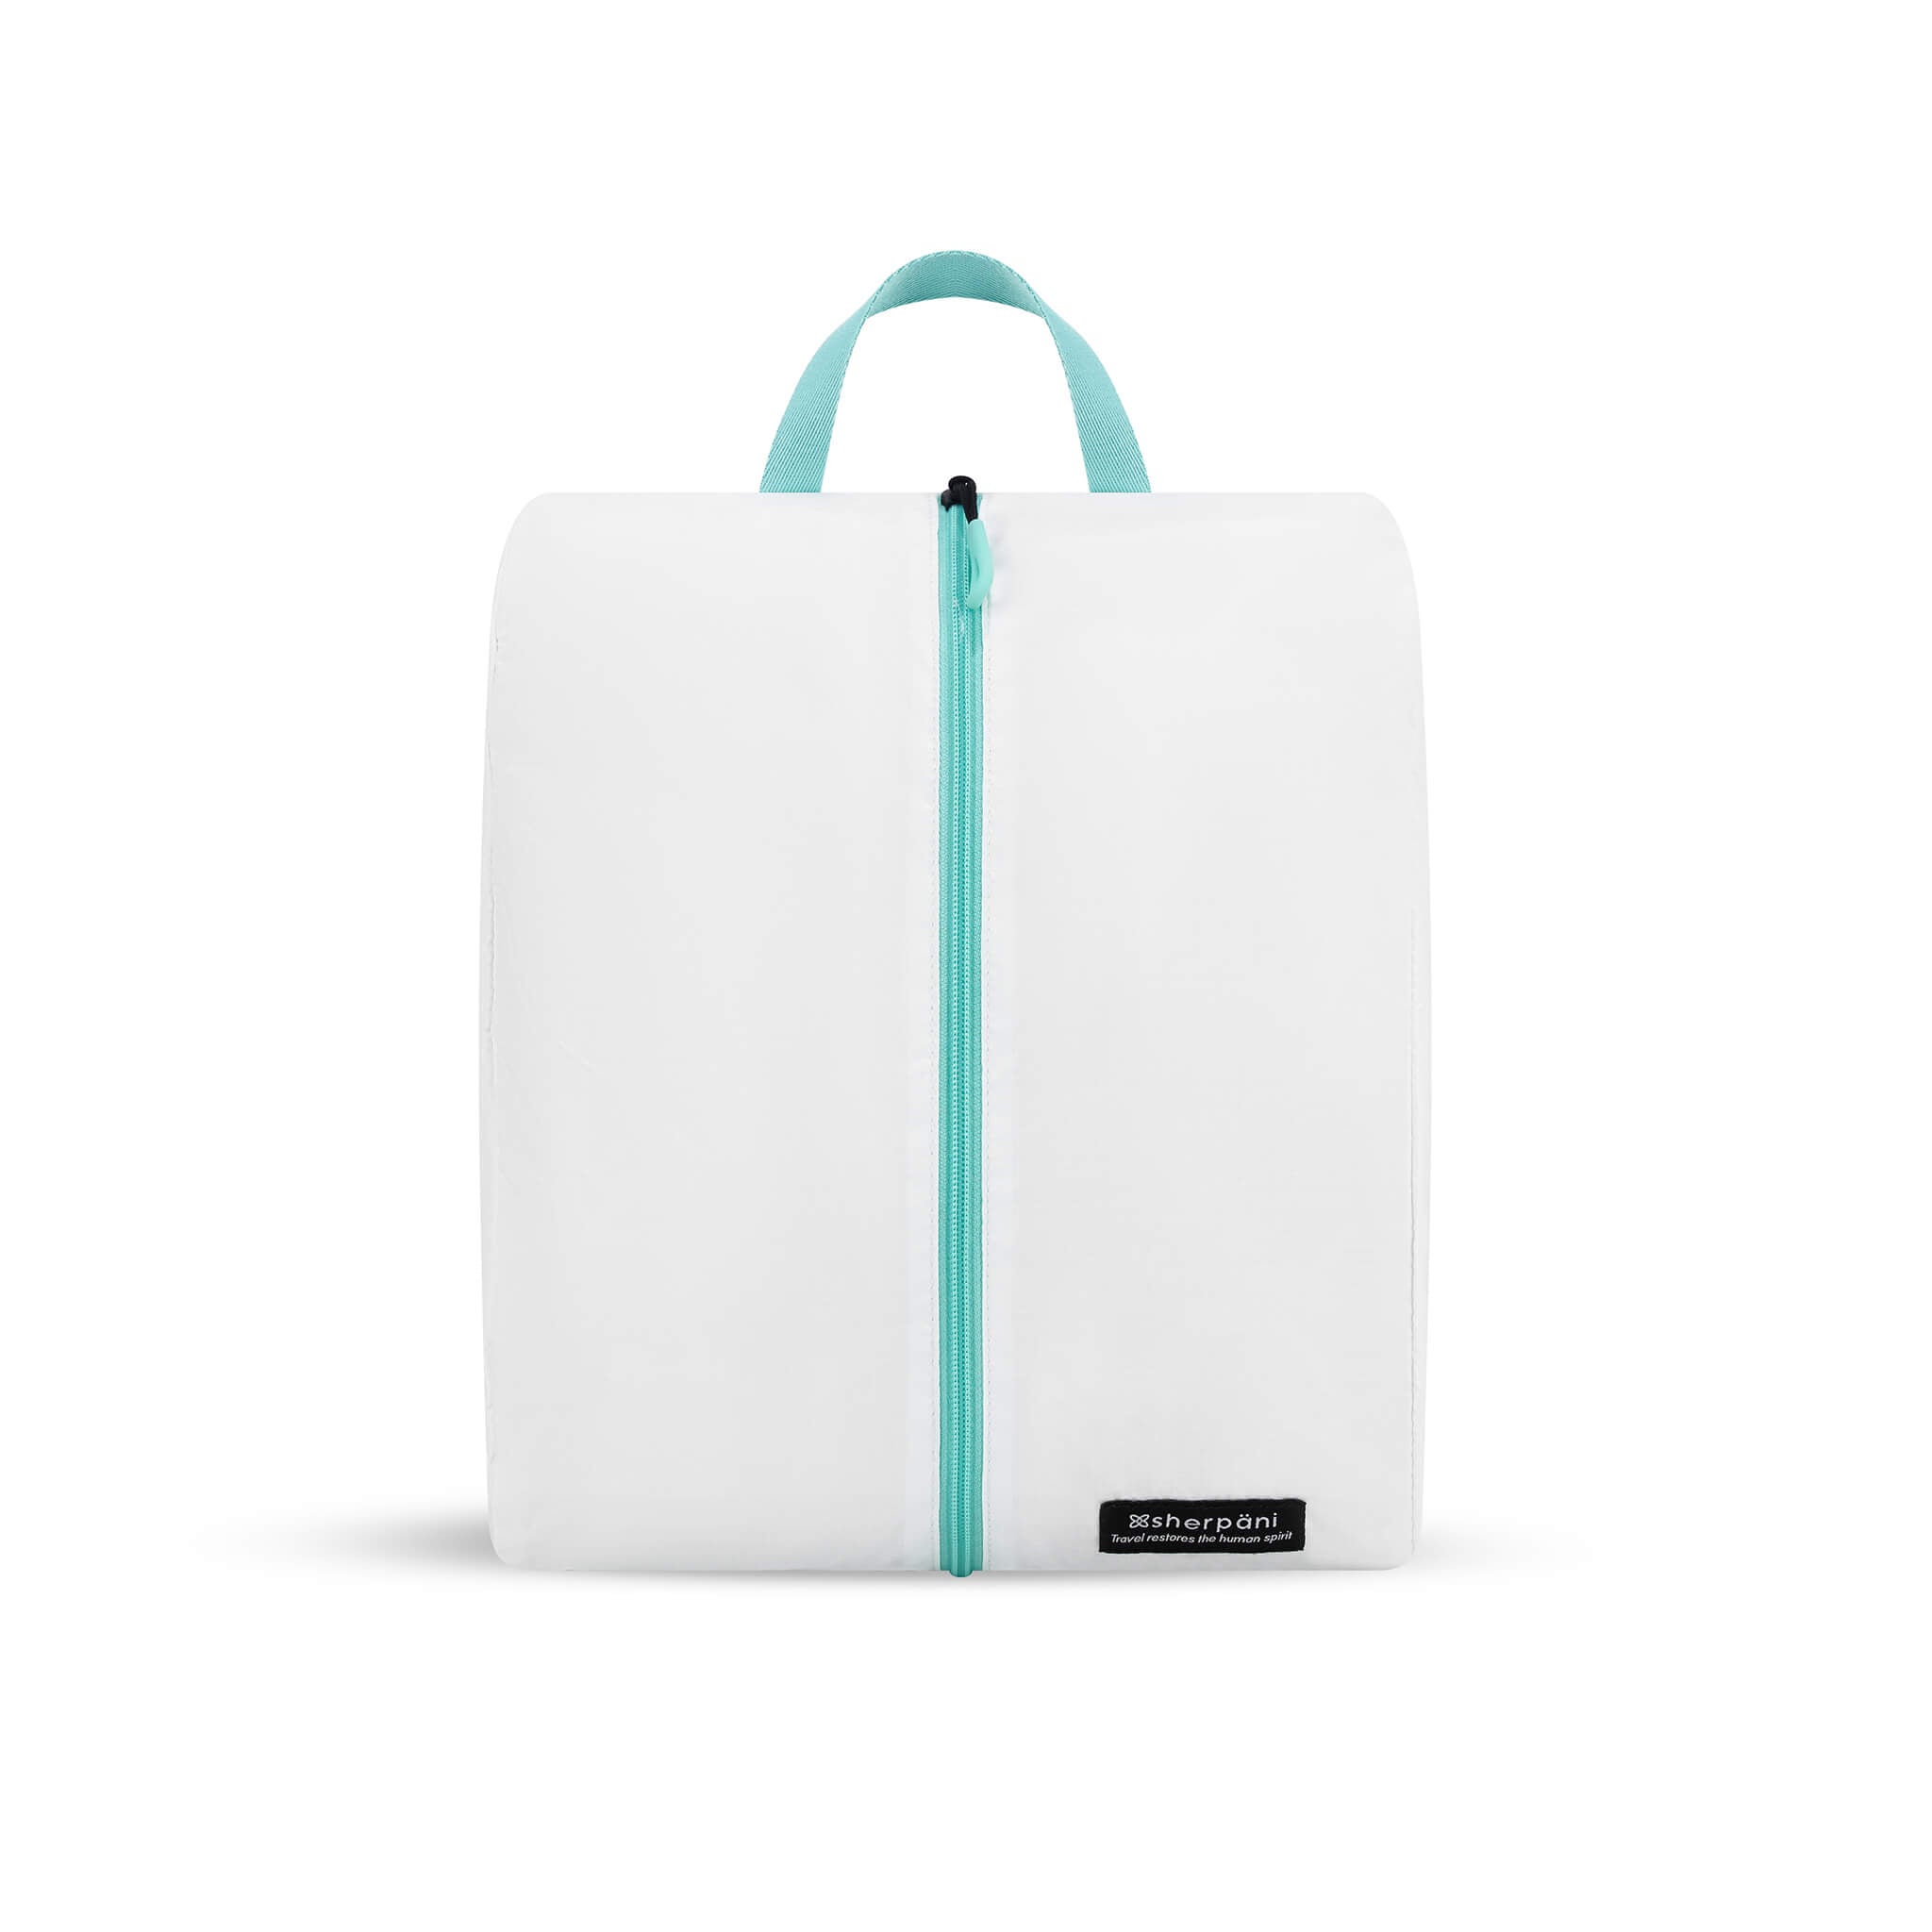 Flat front view of Compass Shoe Bag. The bag is white with zipper and handle accented in aqua.